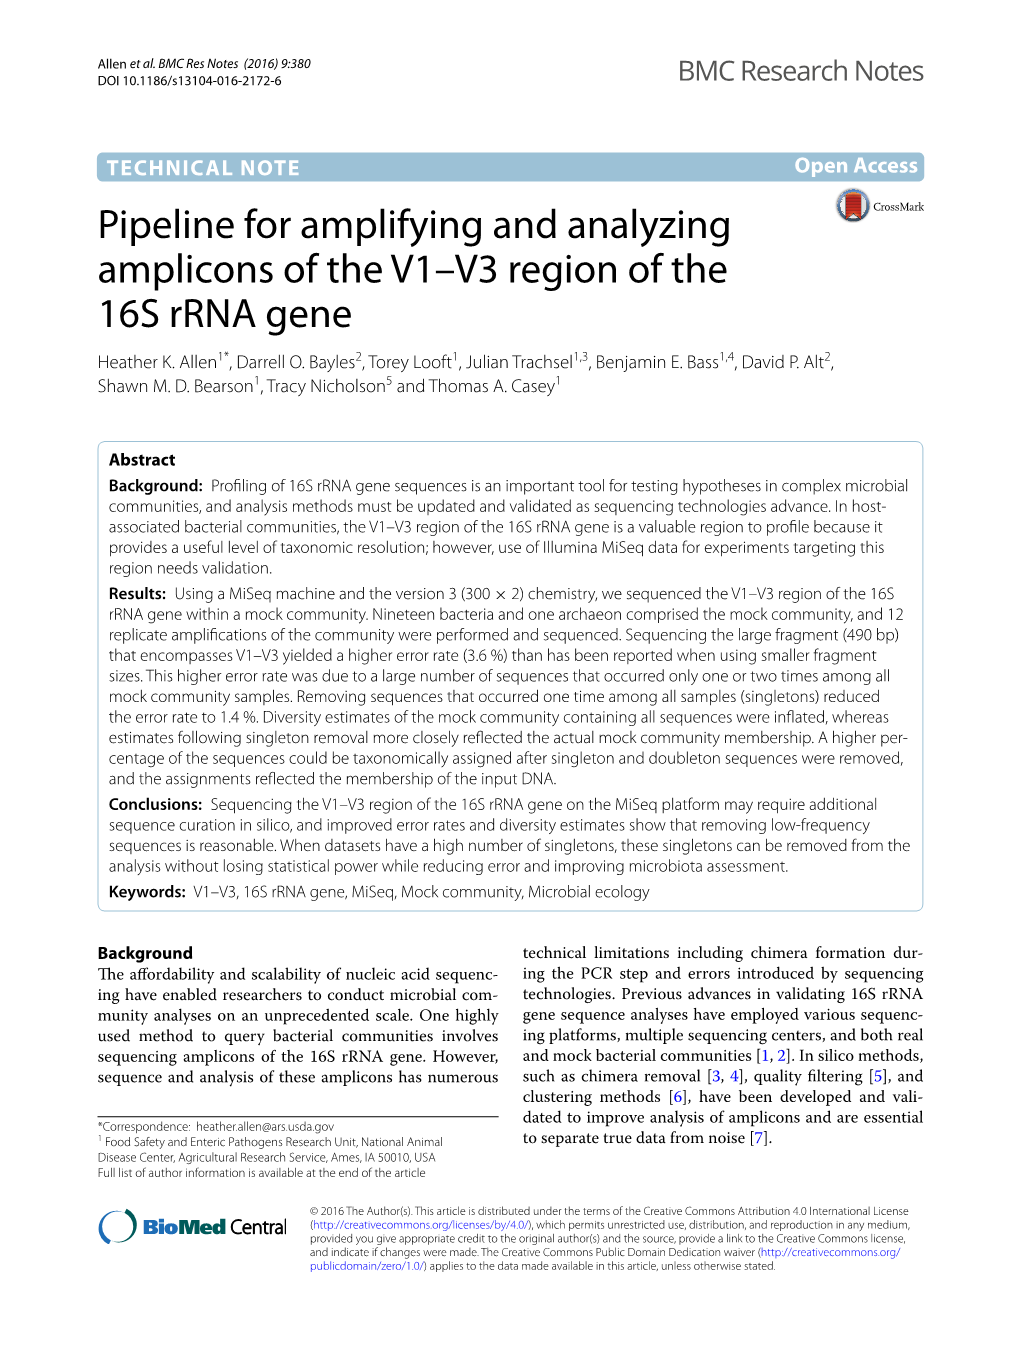 Pipeline for Amplifying and Analyzing Amplicons of the V1–V3 Region of the 16S Rrna Gene Heather K